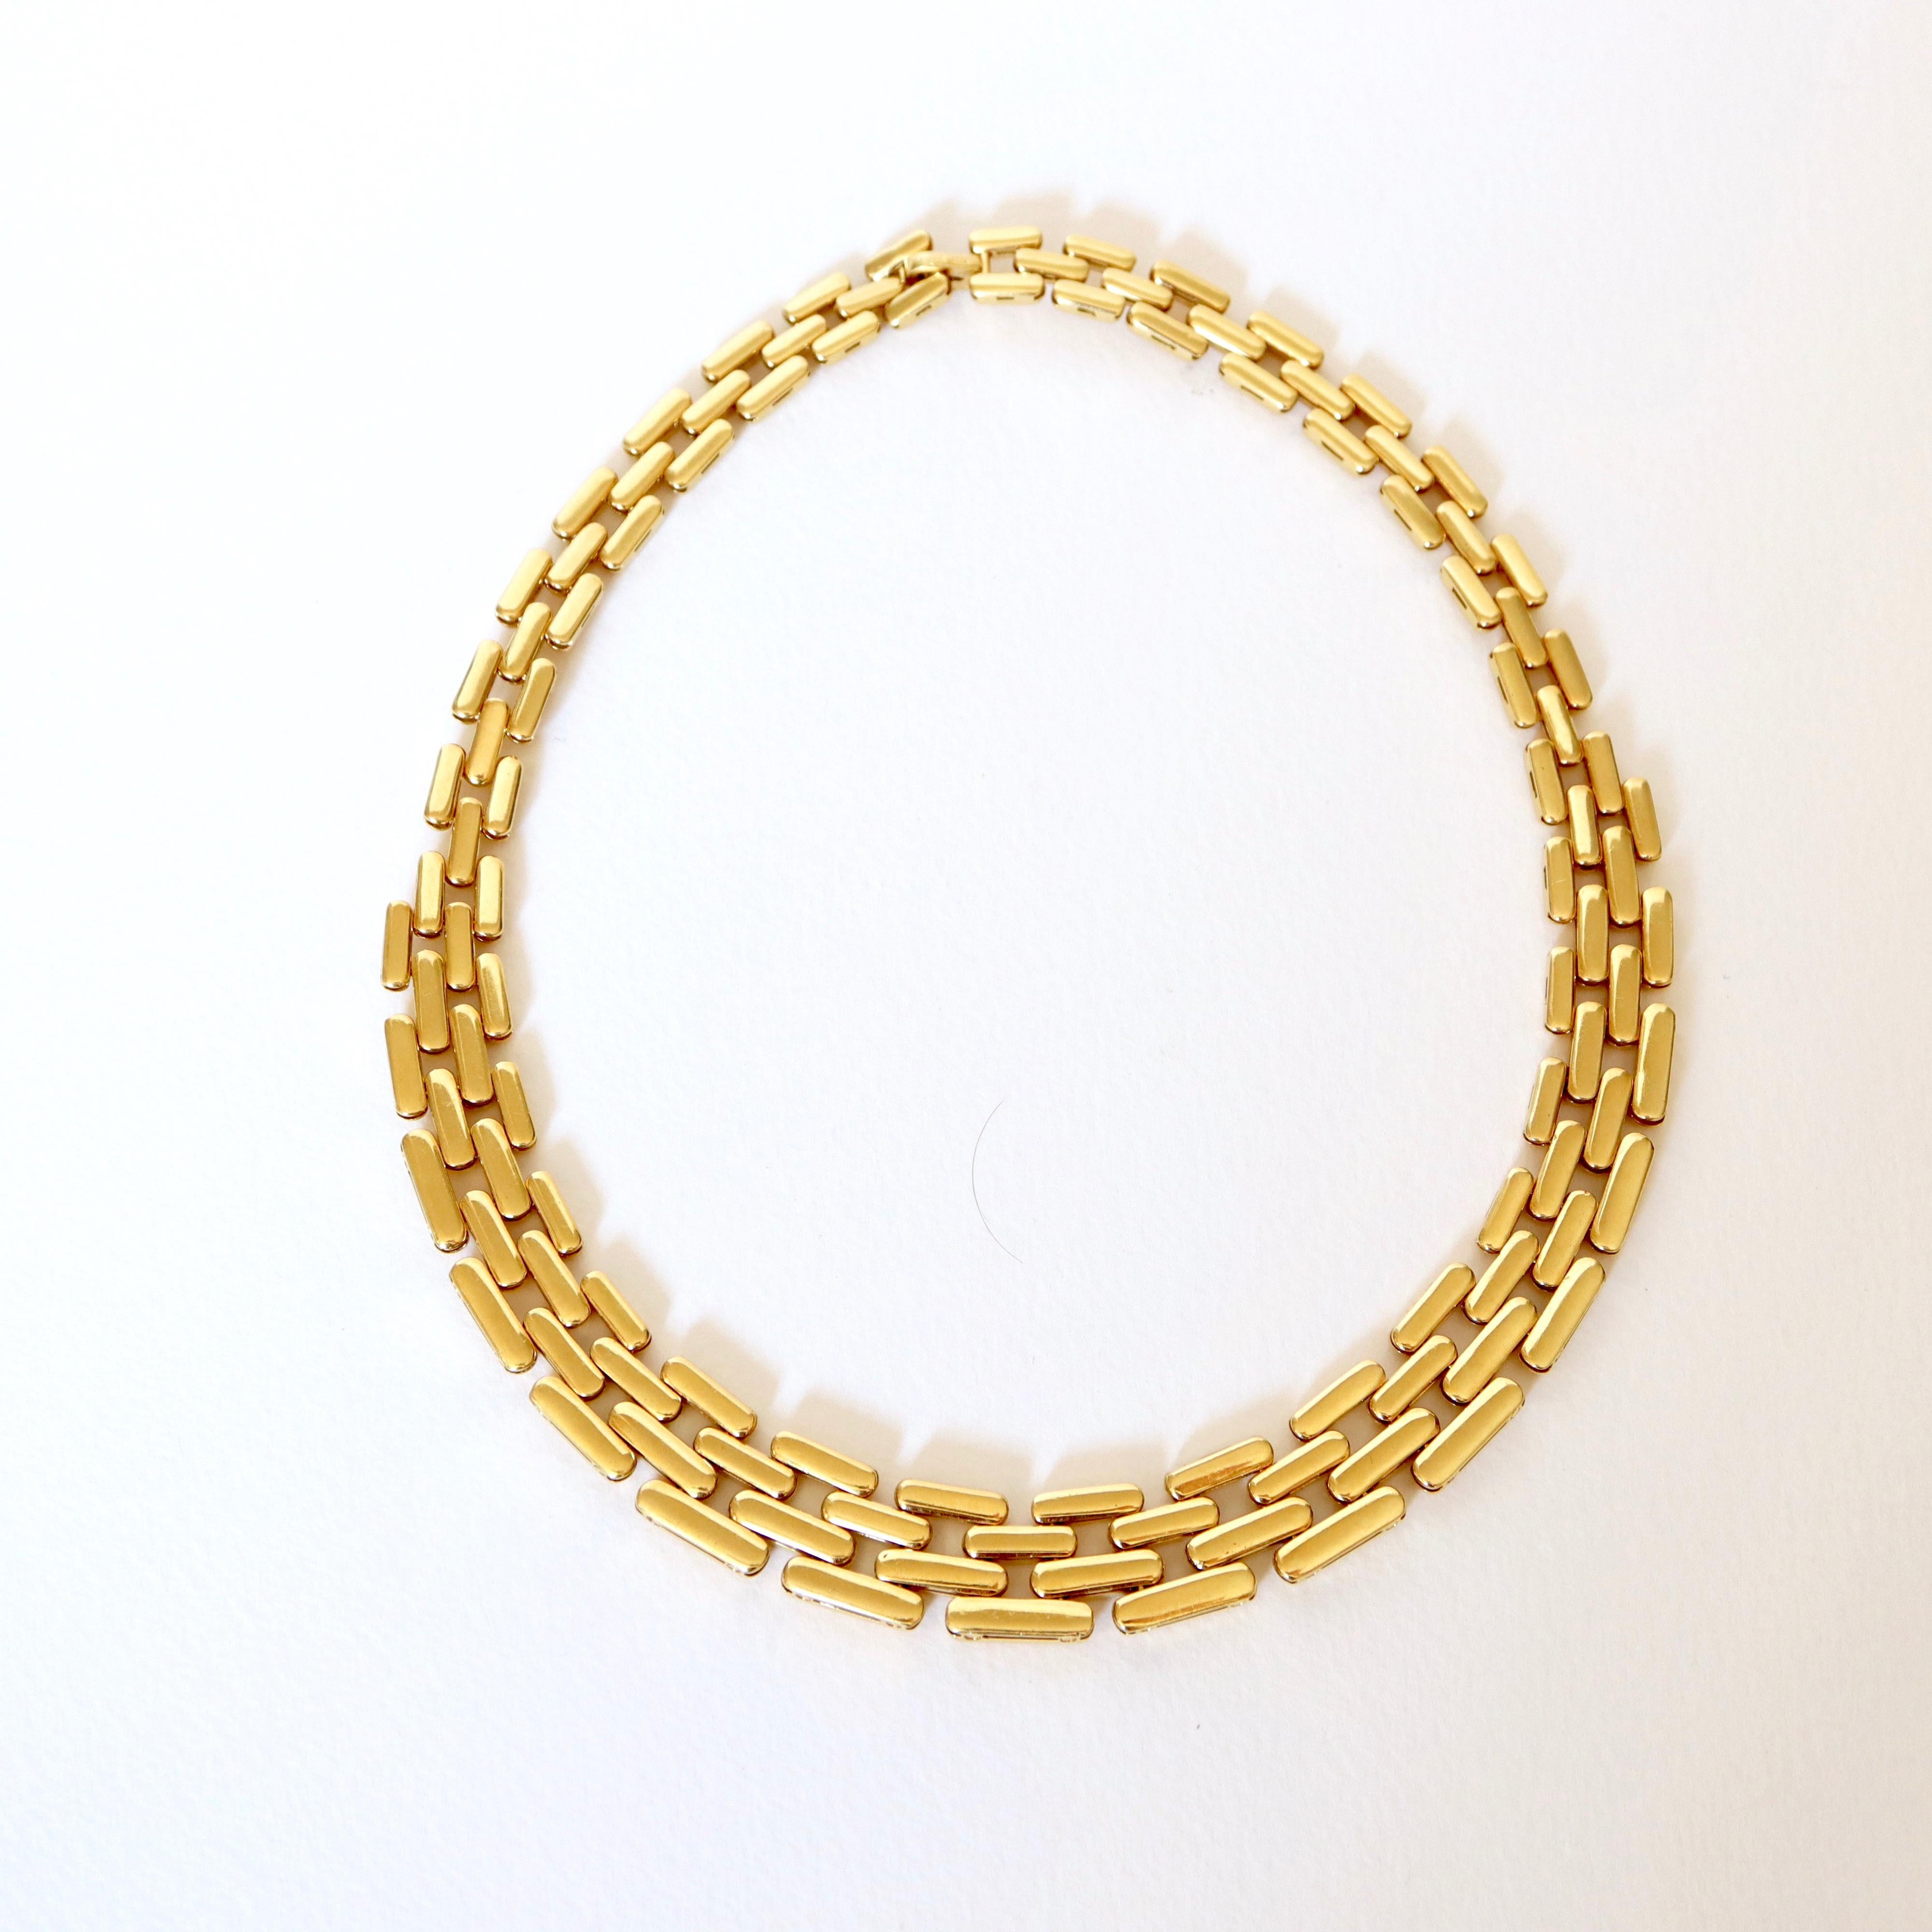 Fred Tank 'Panther' Mesh Necklace in 18 Carat Yellow Gold and Diamonds 1